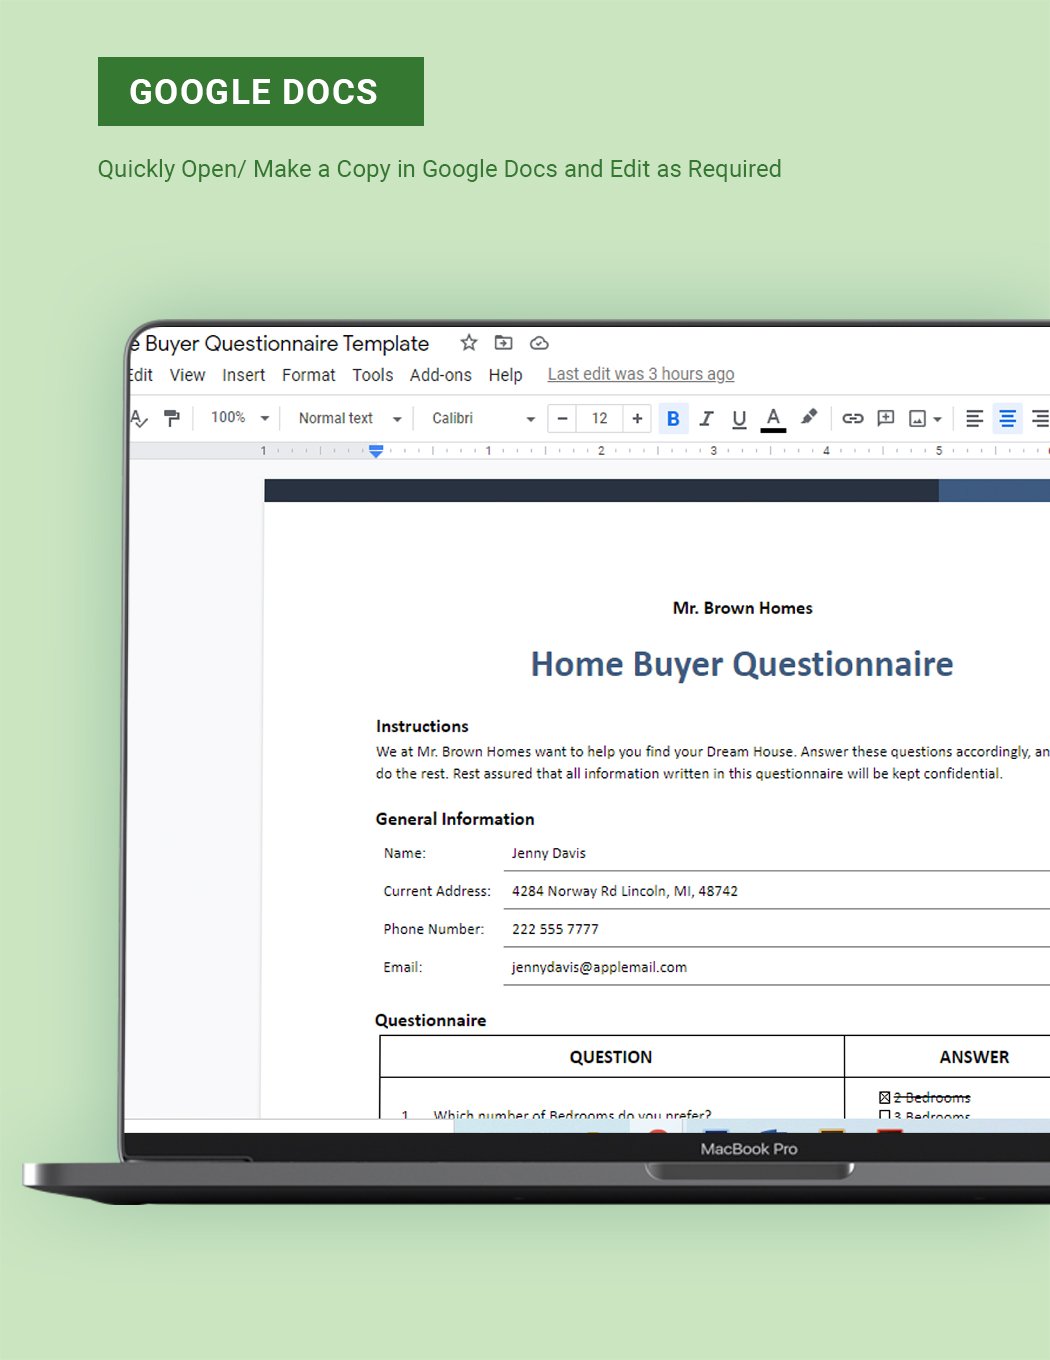 Home Buyer Questionnaire